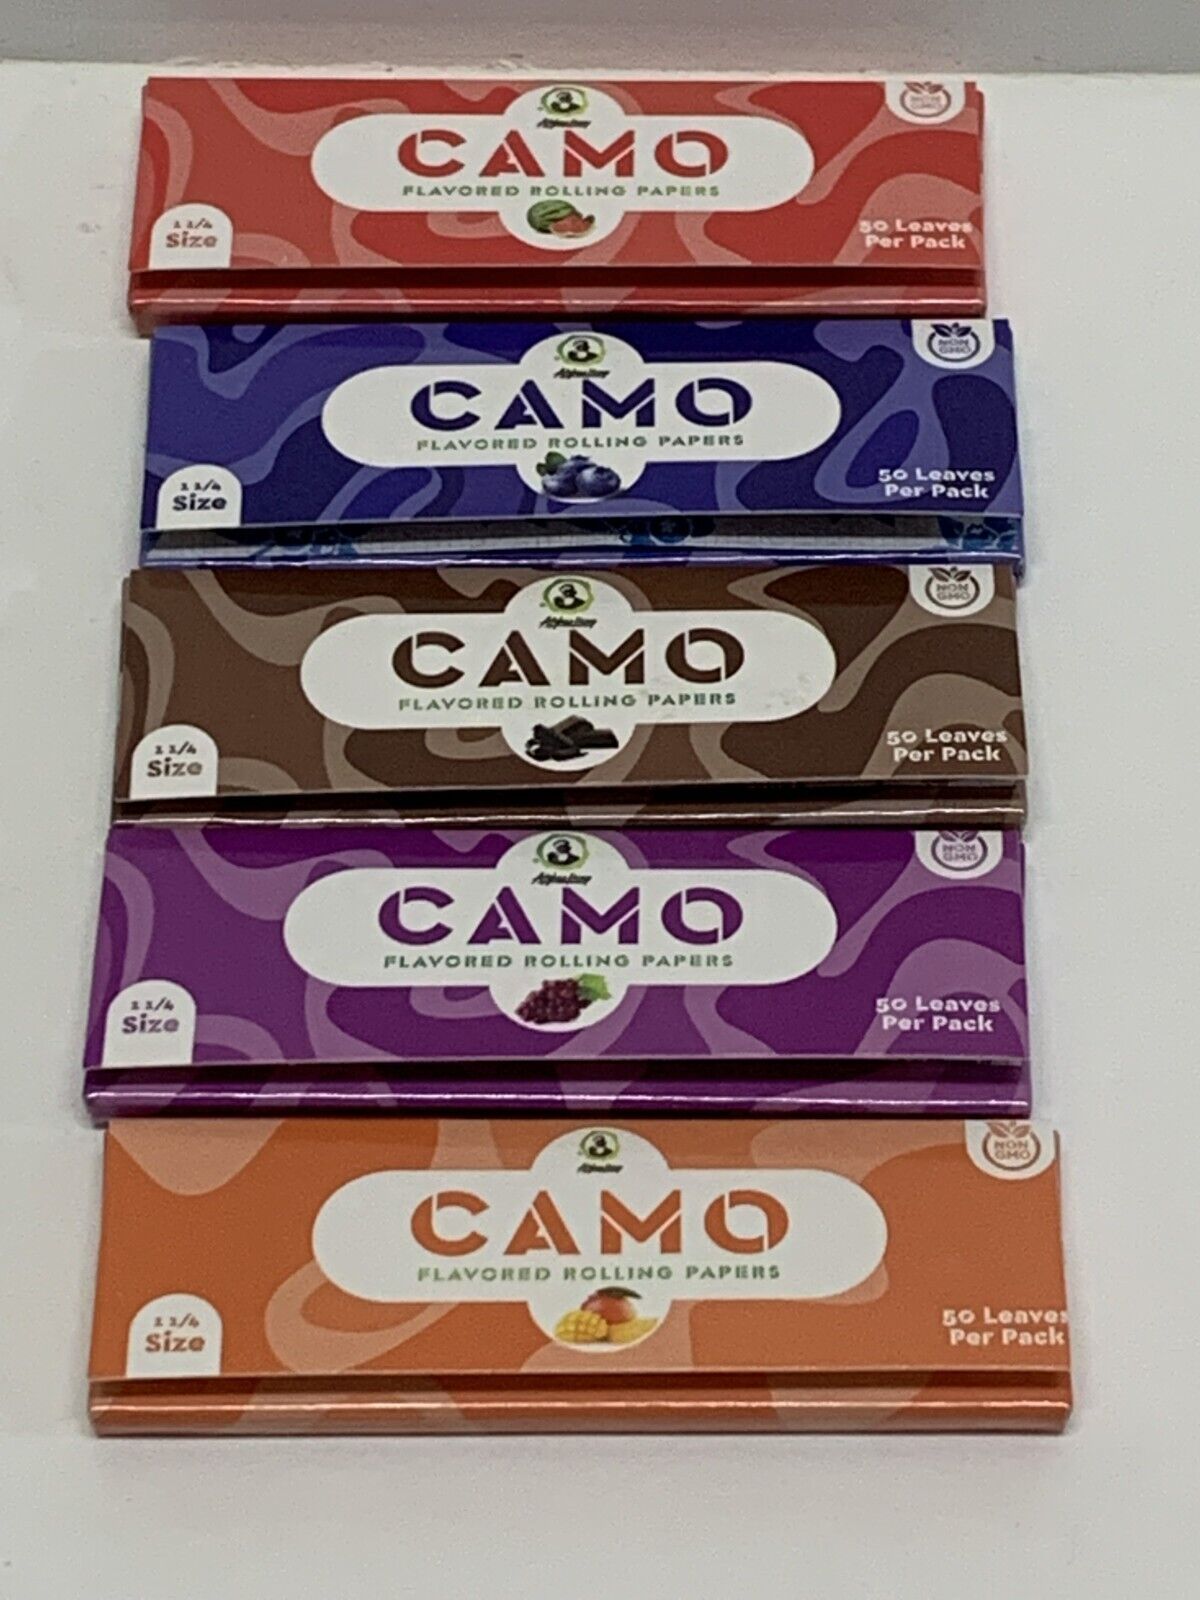 CAMO Rolling Papers 1 1/4 Size/ 50 leaves per pack/FIVE PACKS/ALL FLAVORS